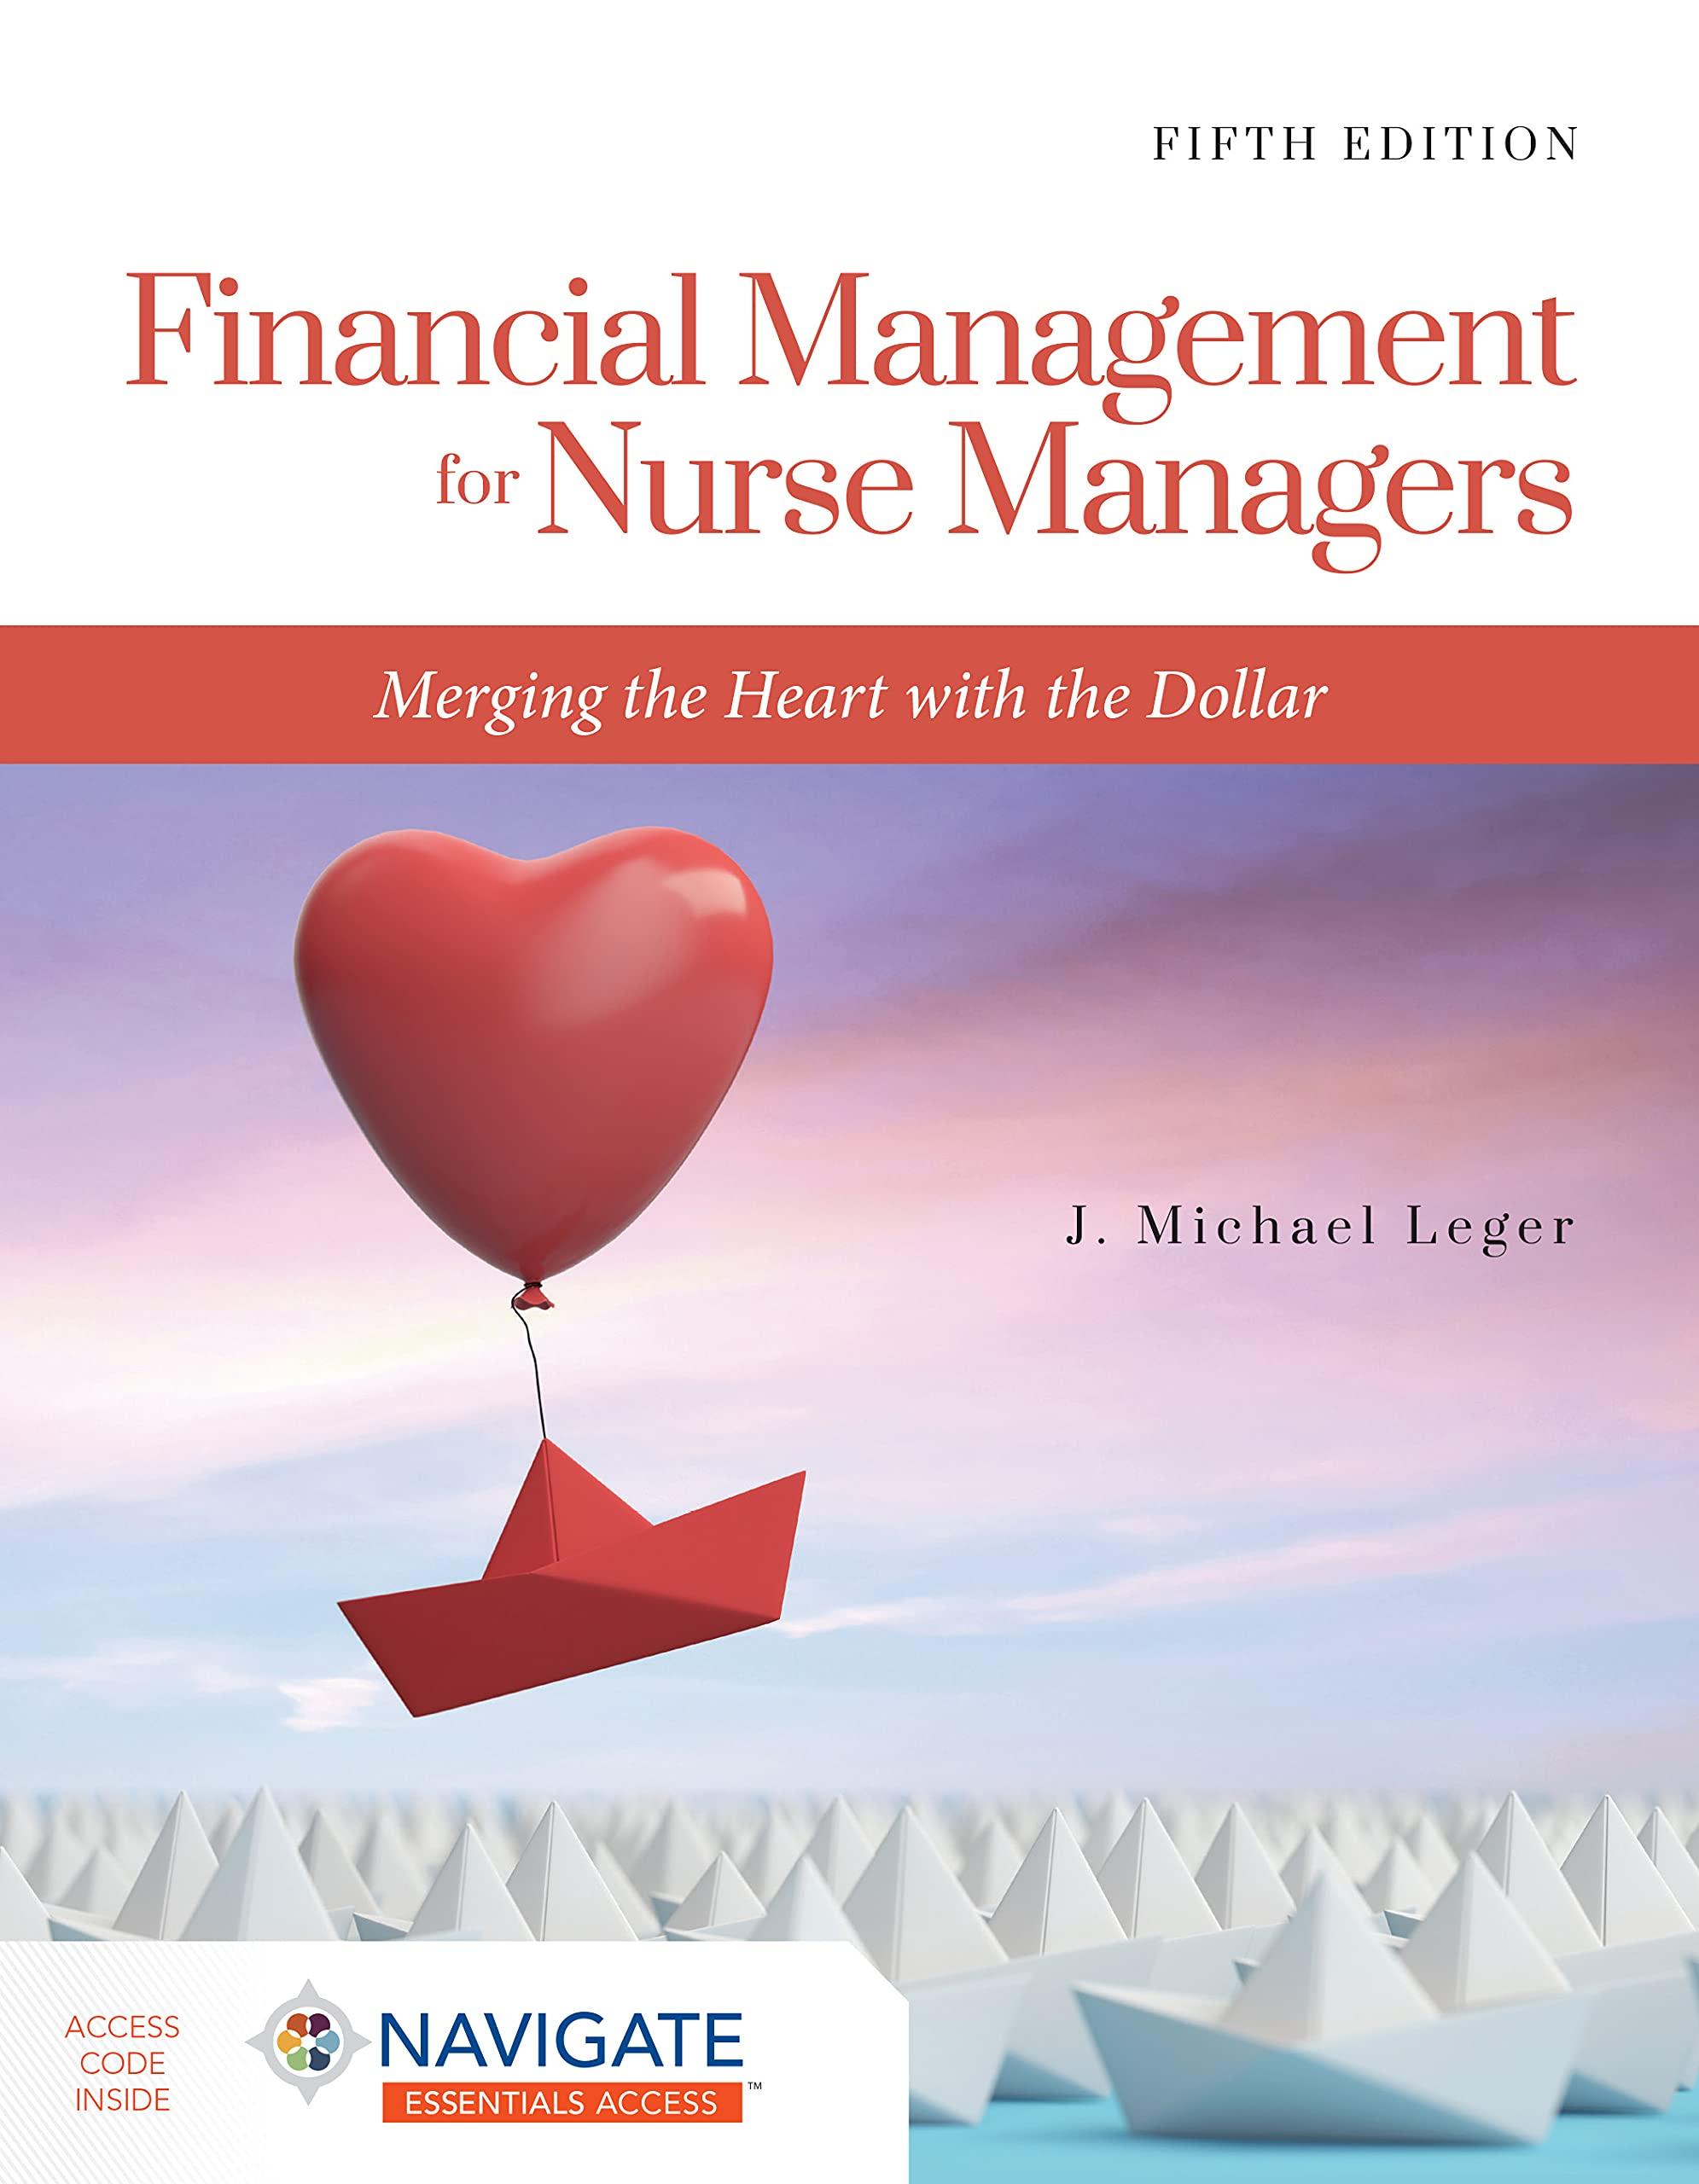 financial management for nurse managers 5th edition j. michael leger 1284230937, 9781284230932